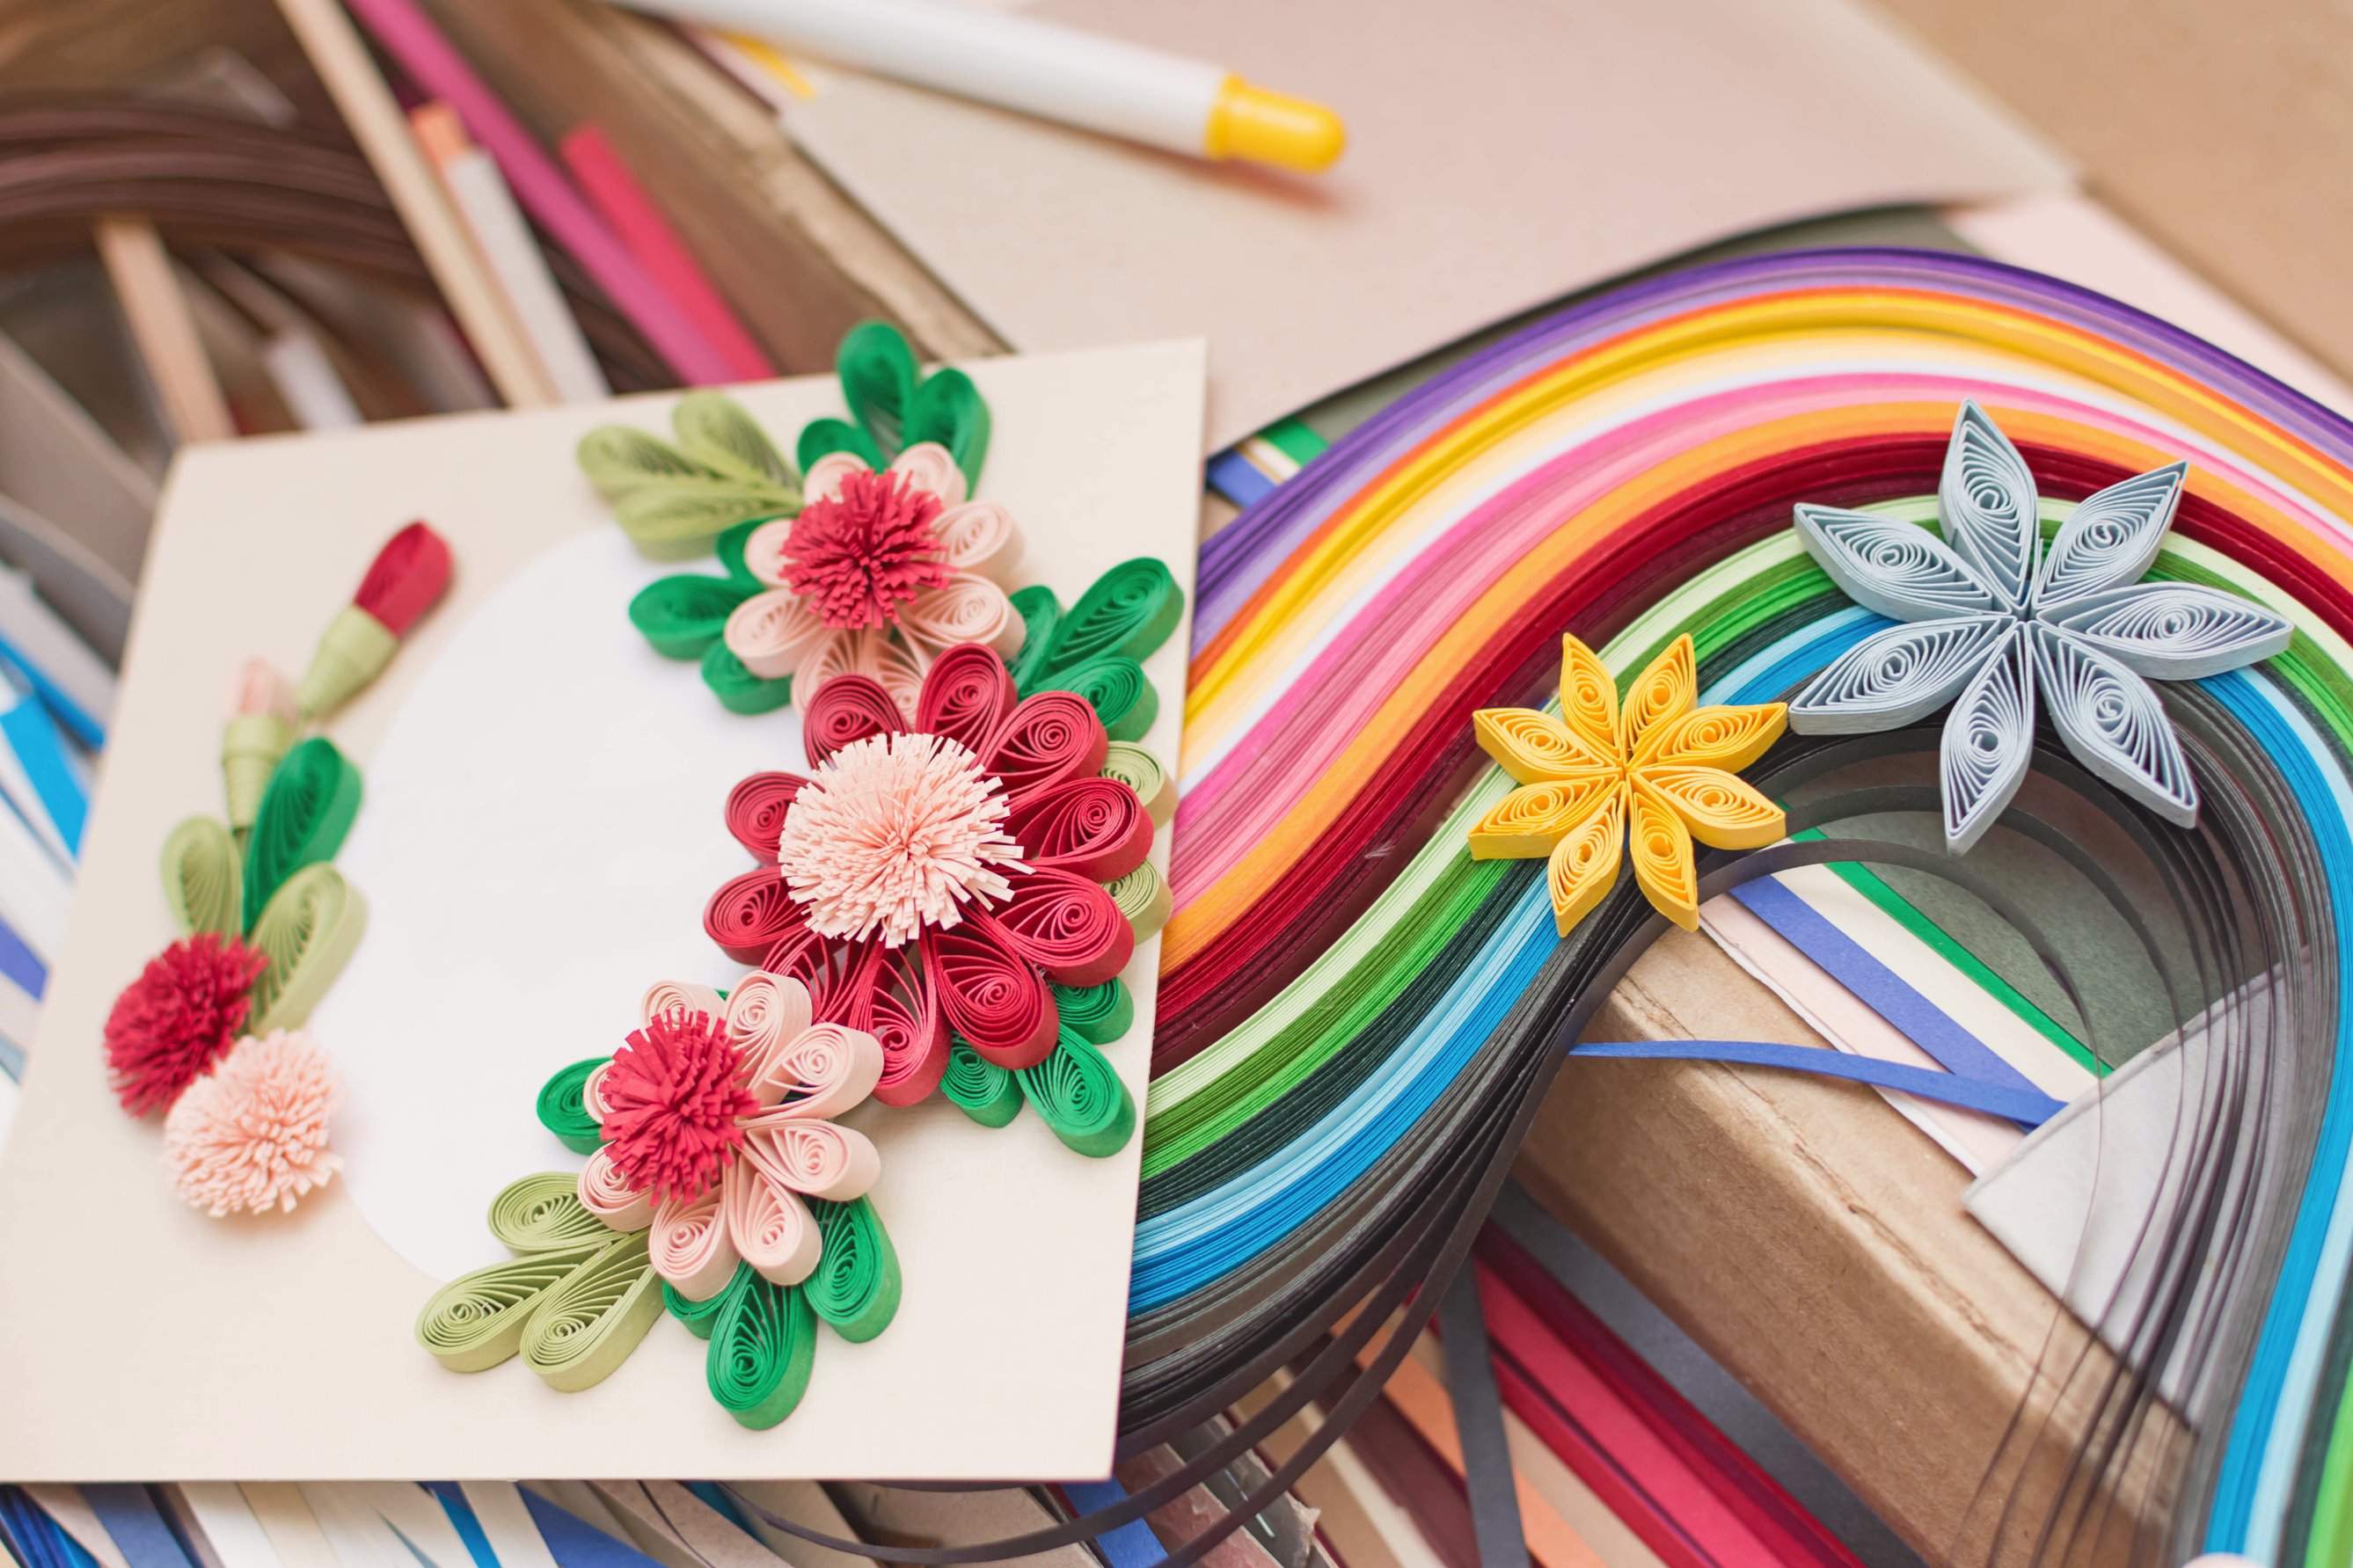 Nordic Style Quilling Art Workshop